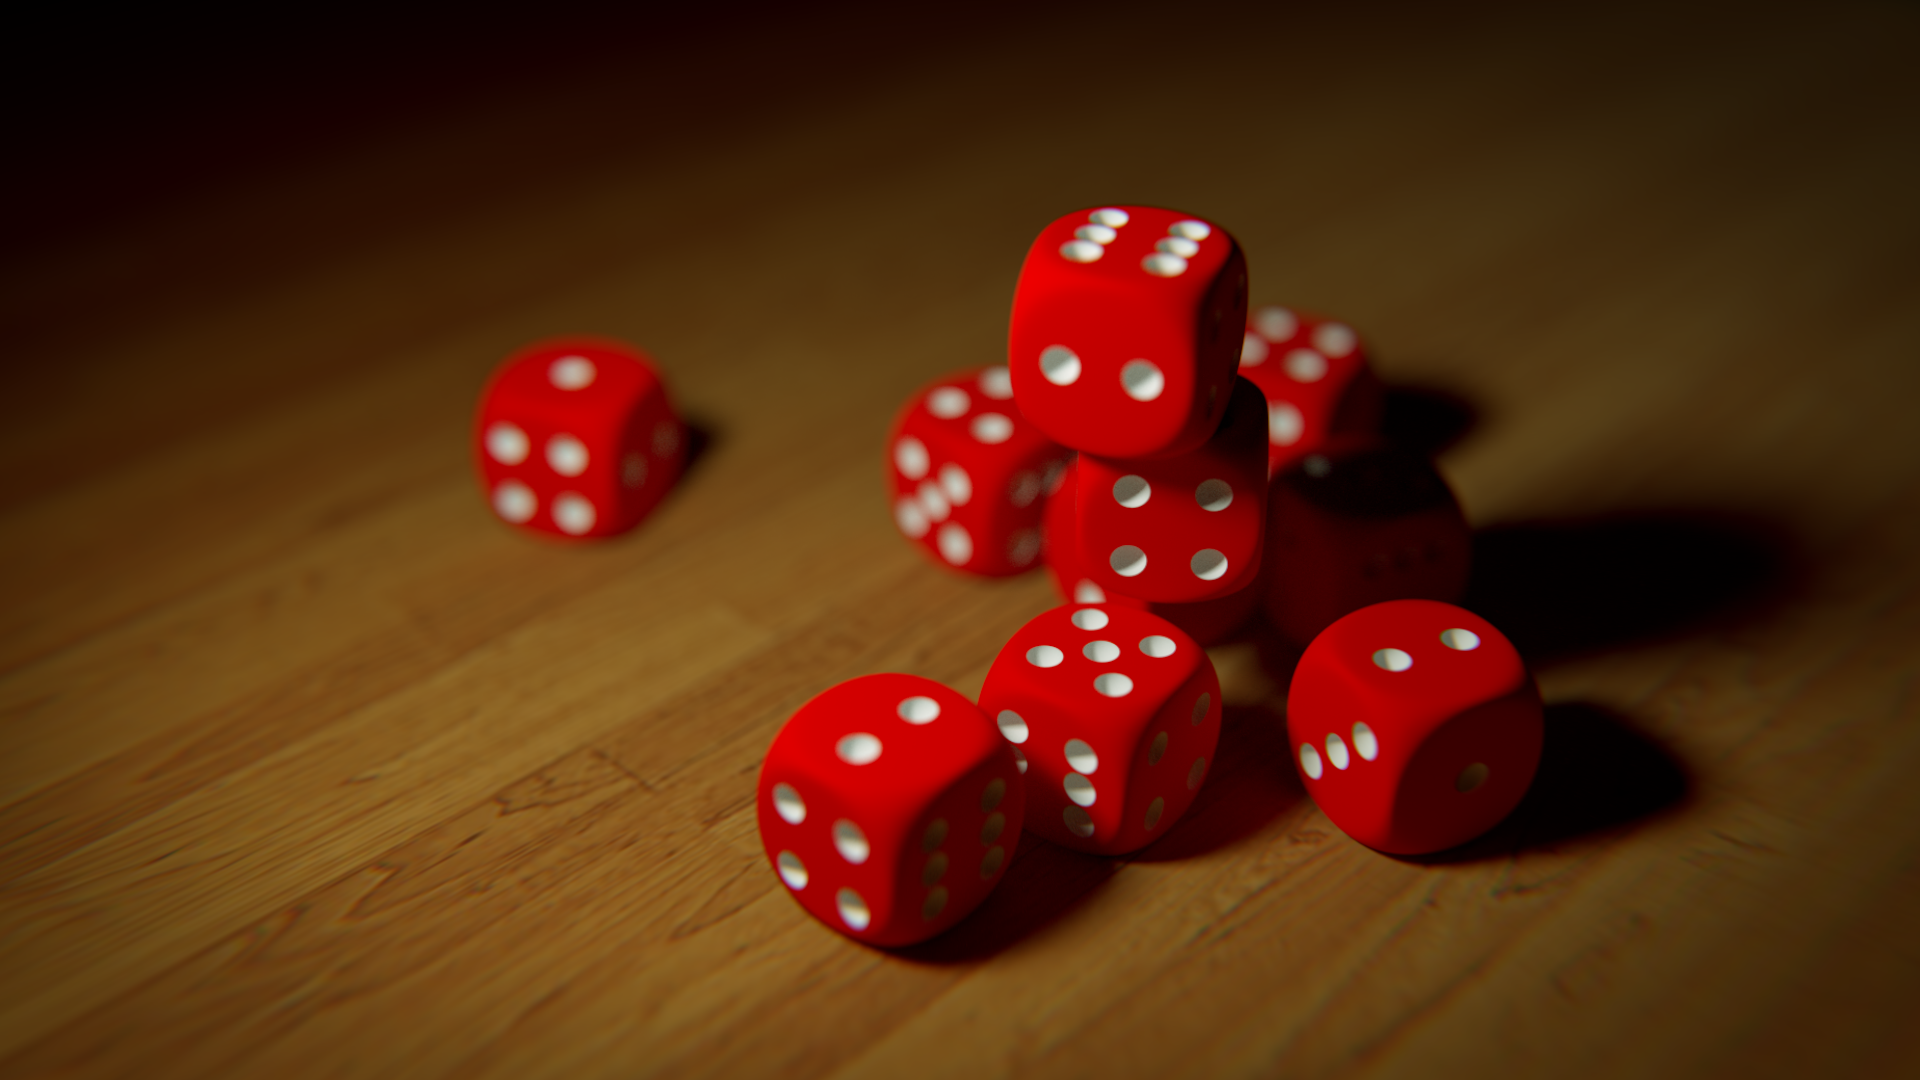 dice wallpaper,games,indoor games and sports,dice game,dice,red